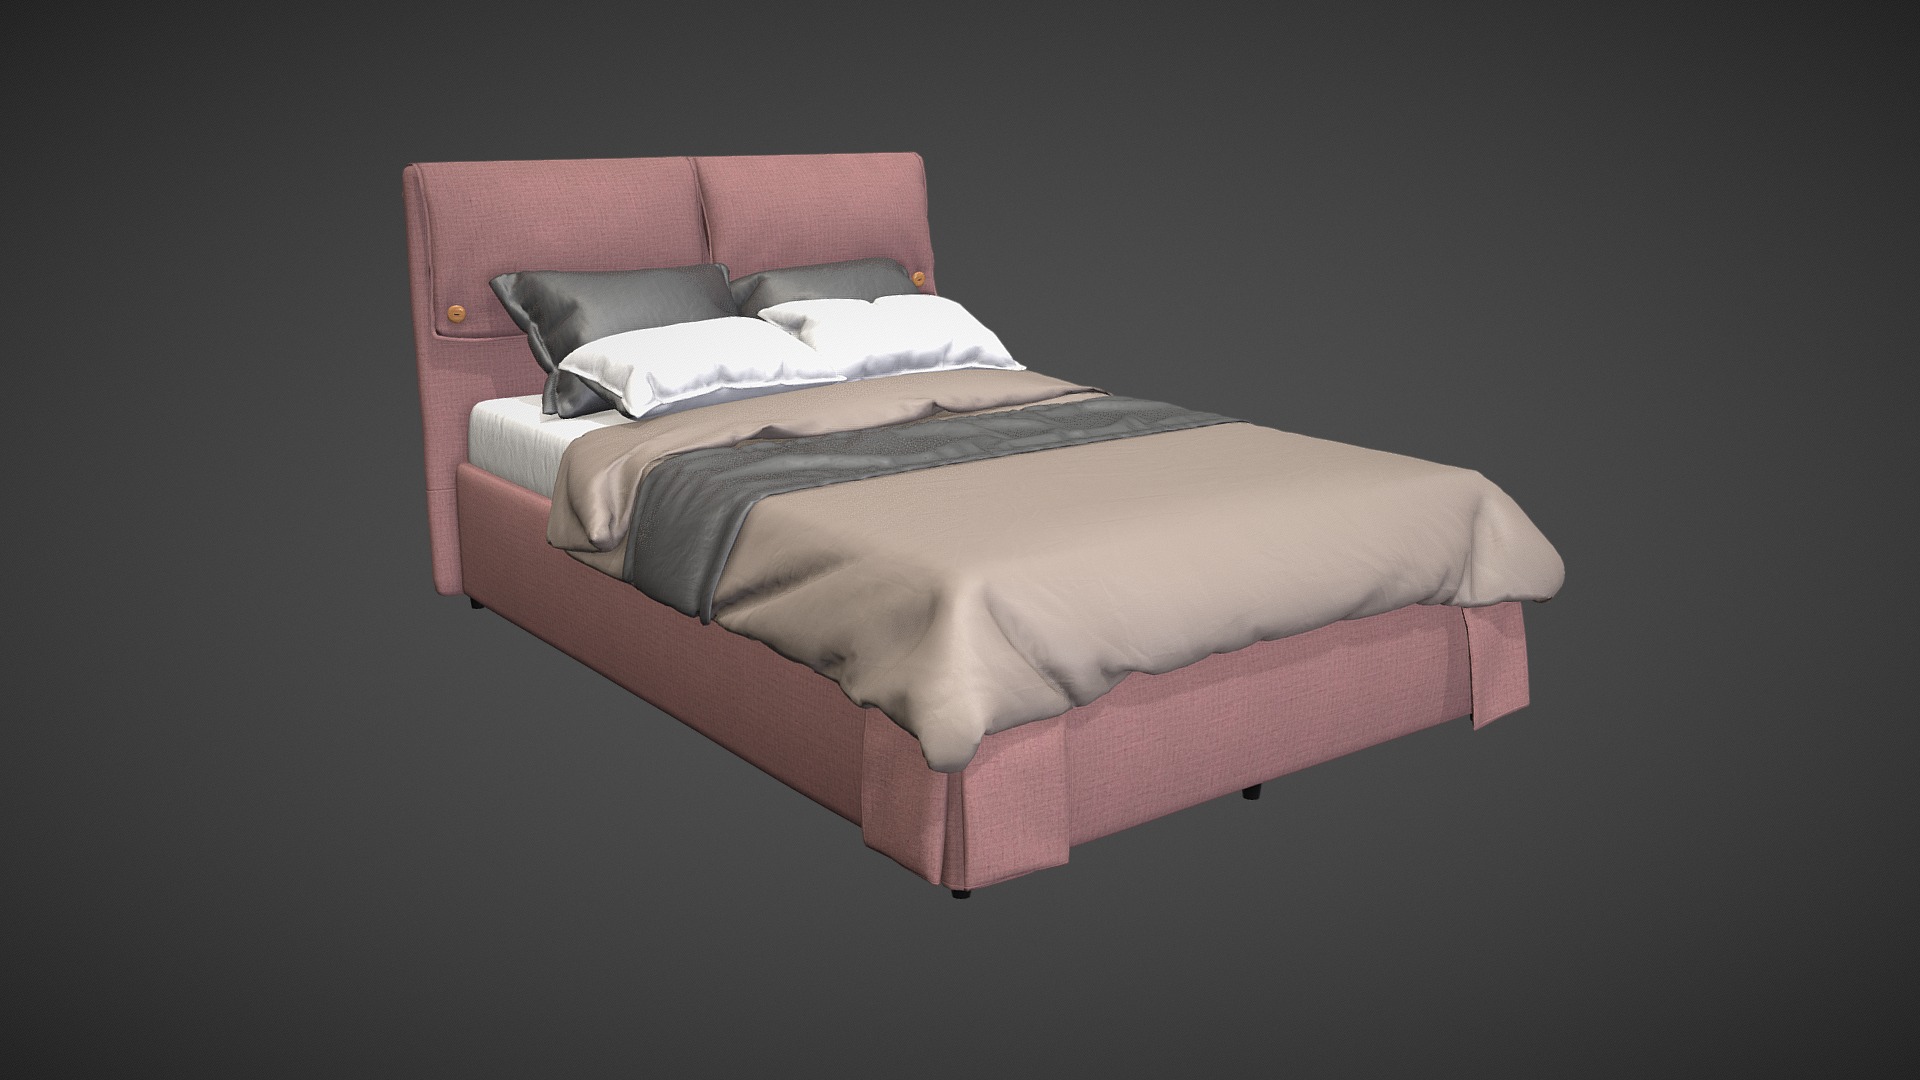 3D model Bed Unurgunite - This is a 3D model of the Bed Unurgunite. The 3D model is about a bed with a pink cover.